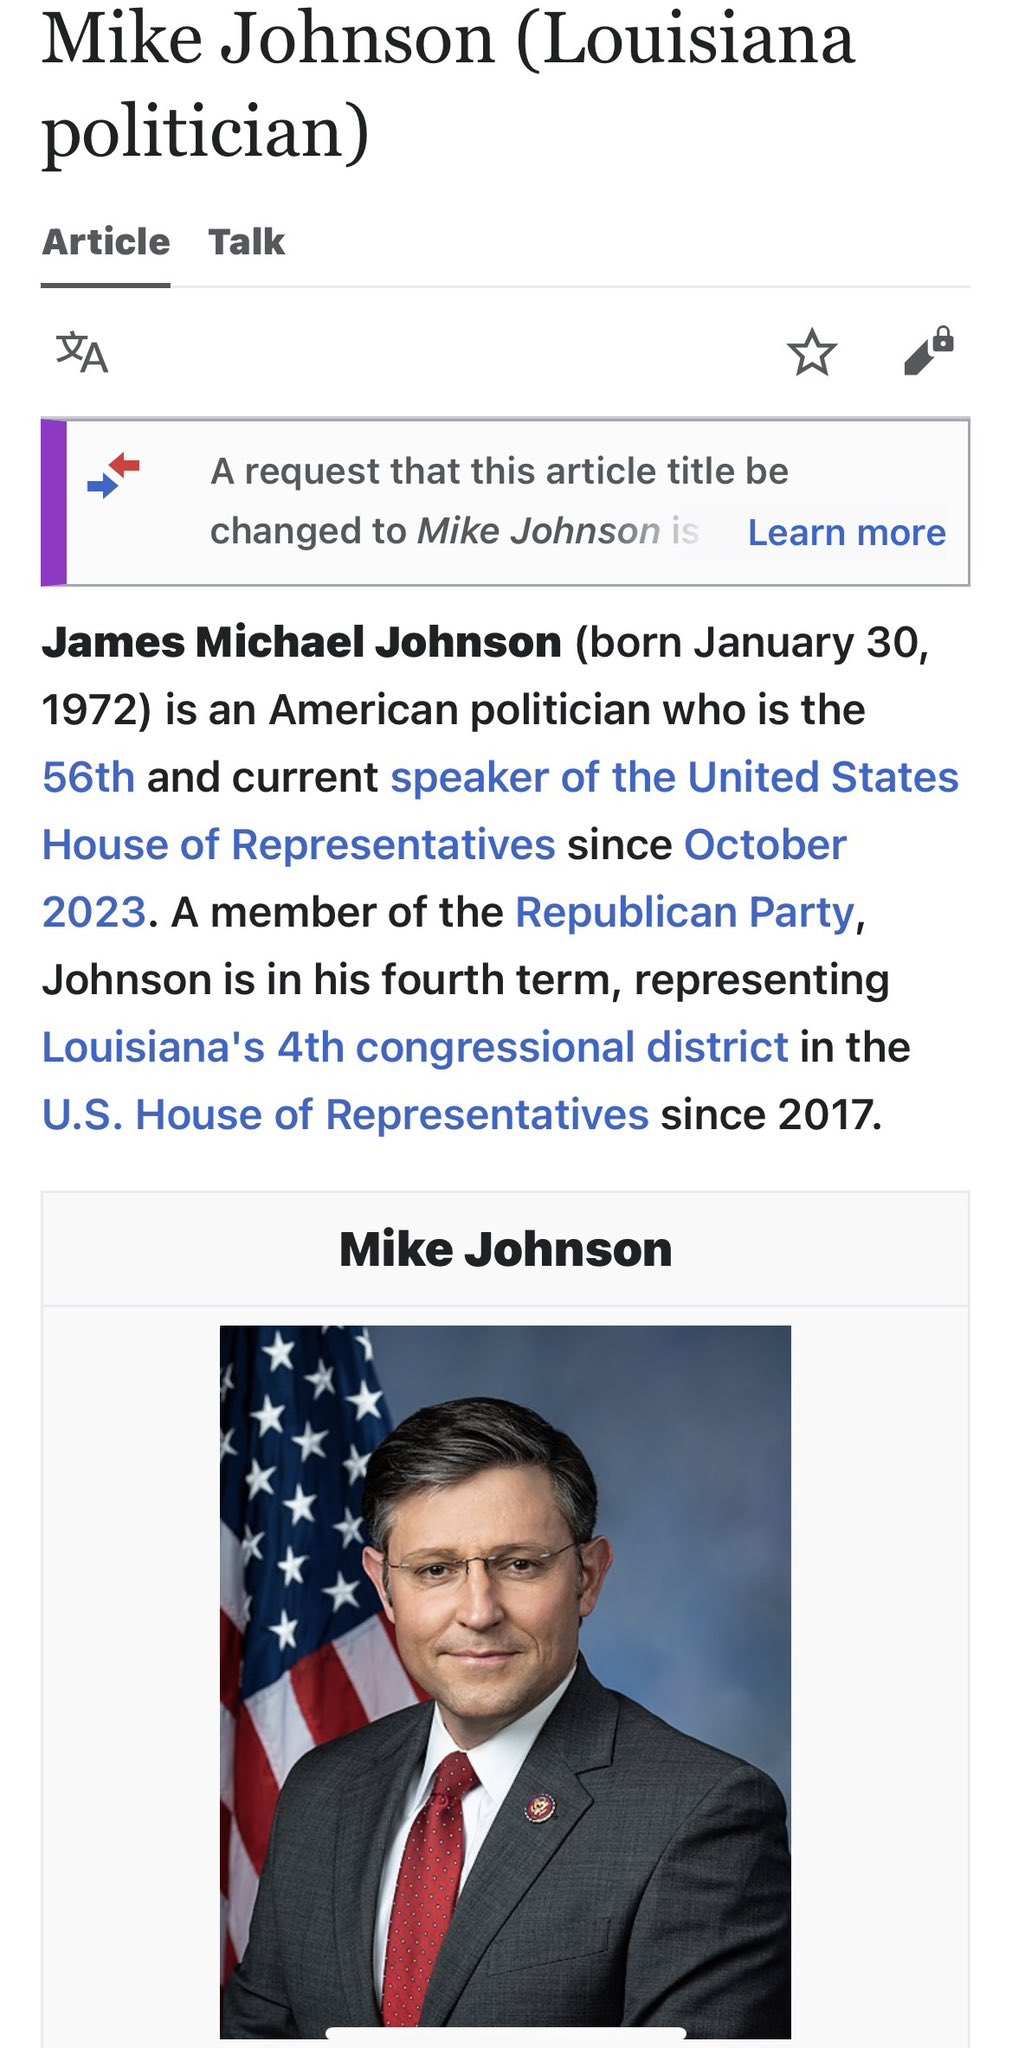 Speaker of the United States House of Representatives - Wikipedia